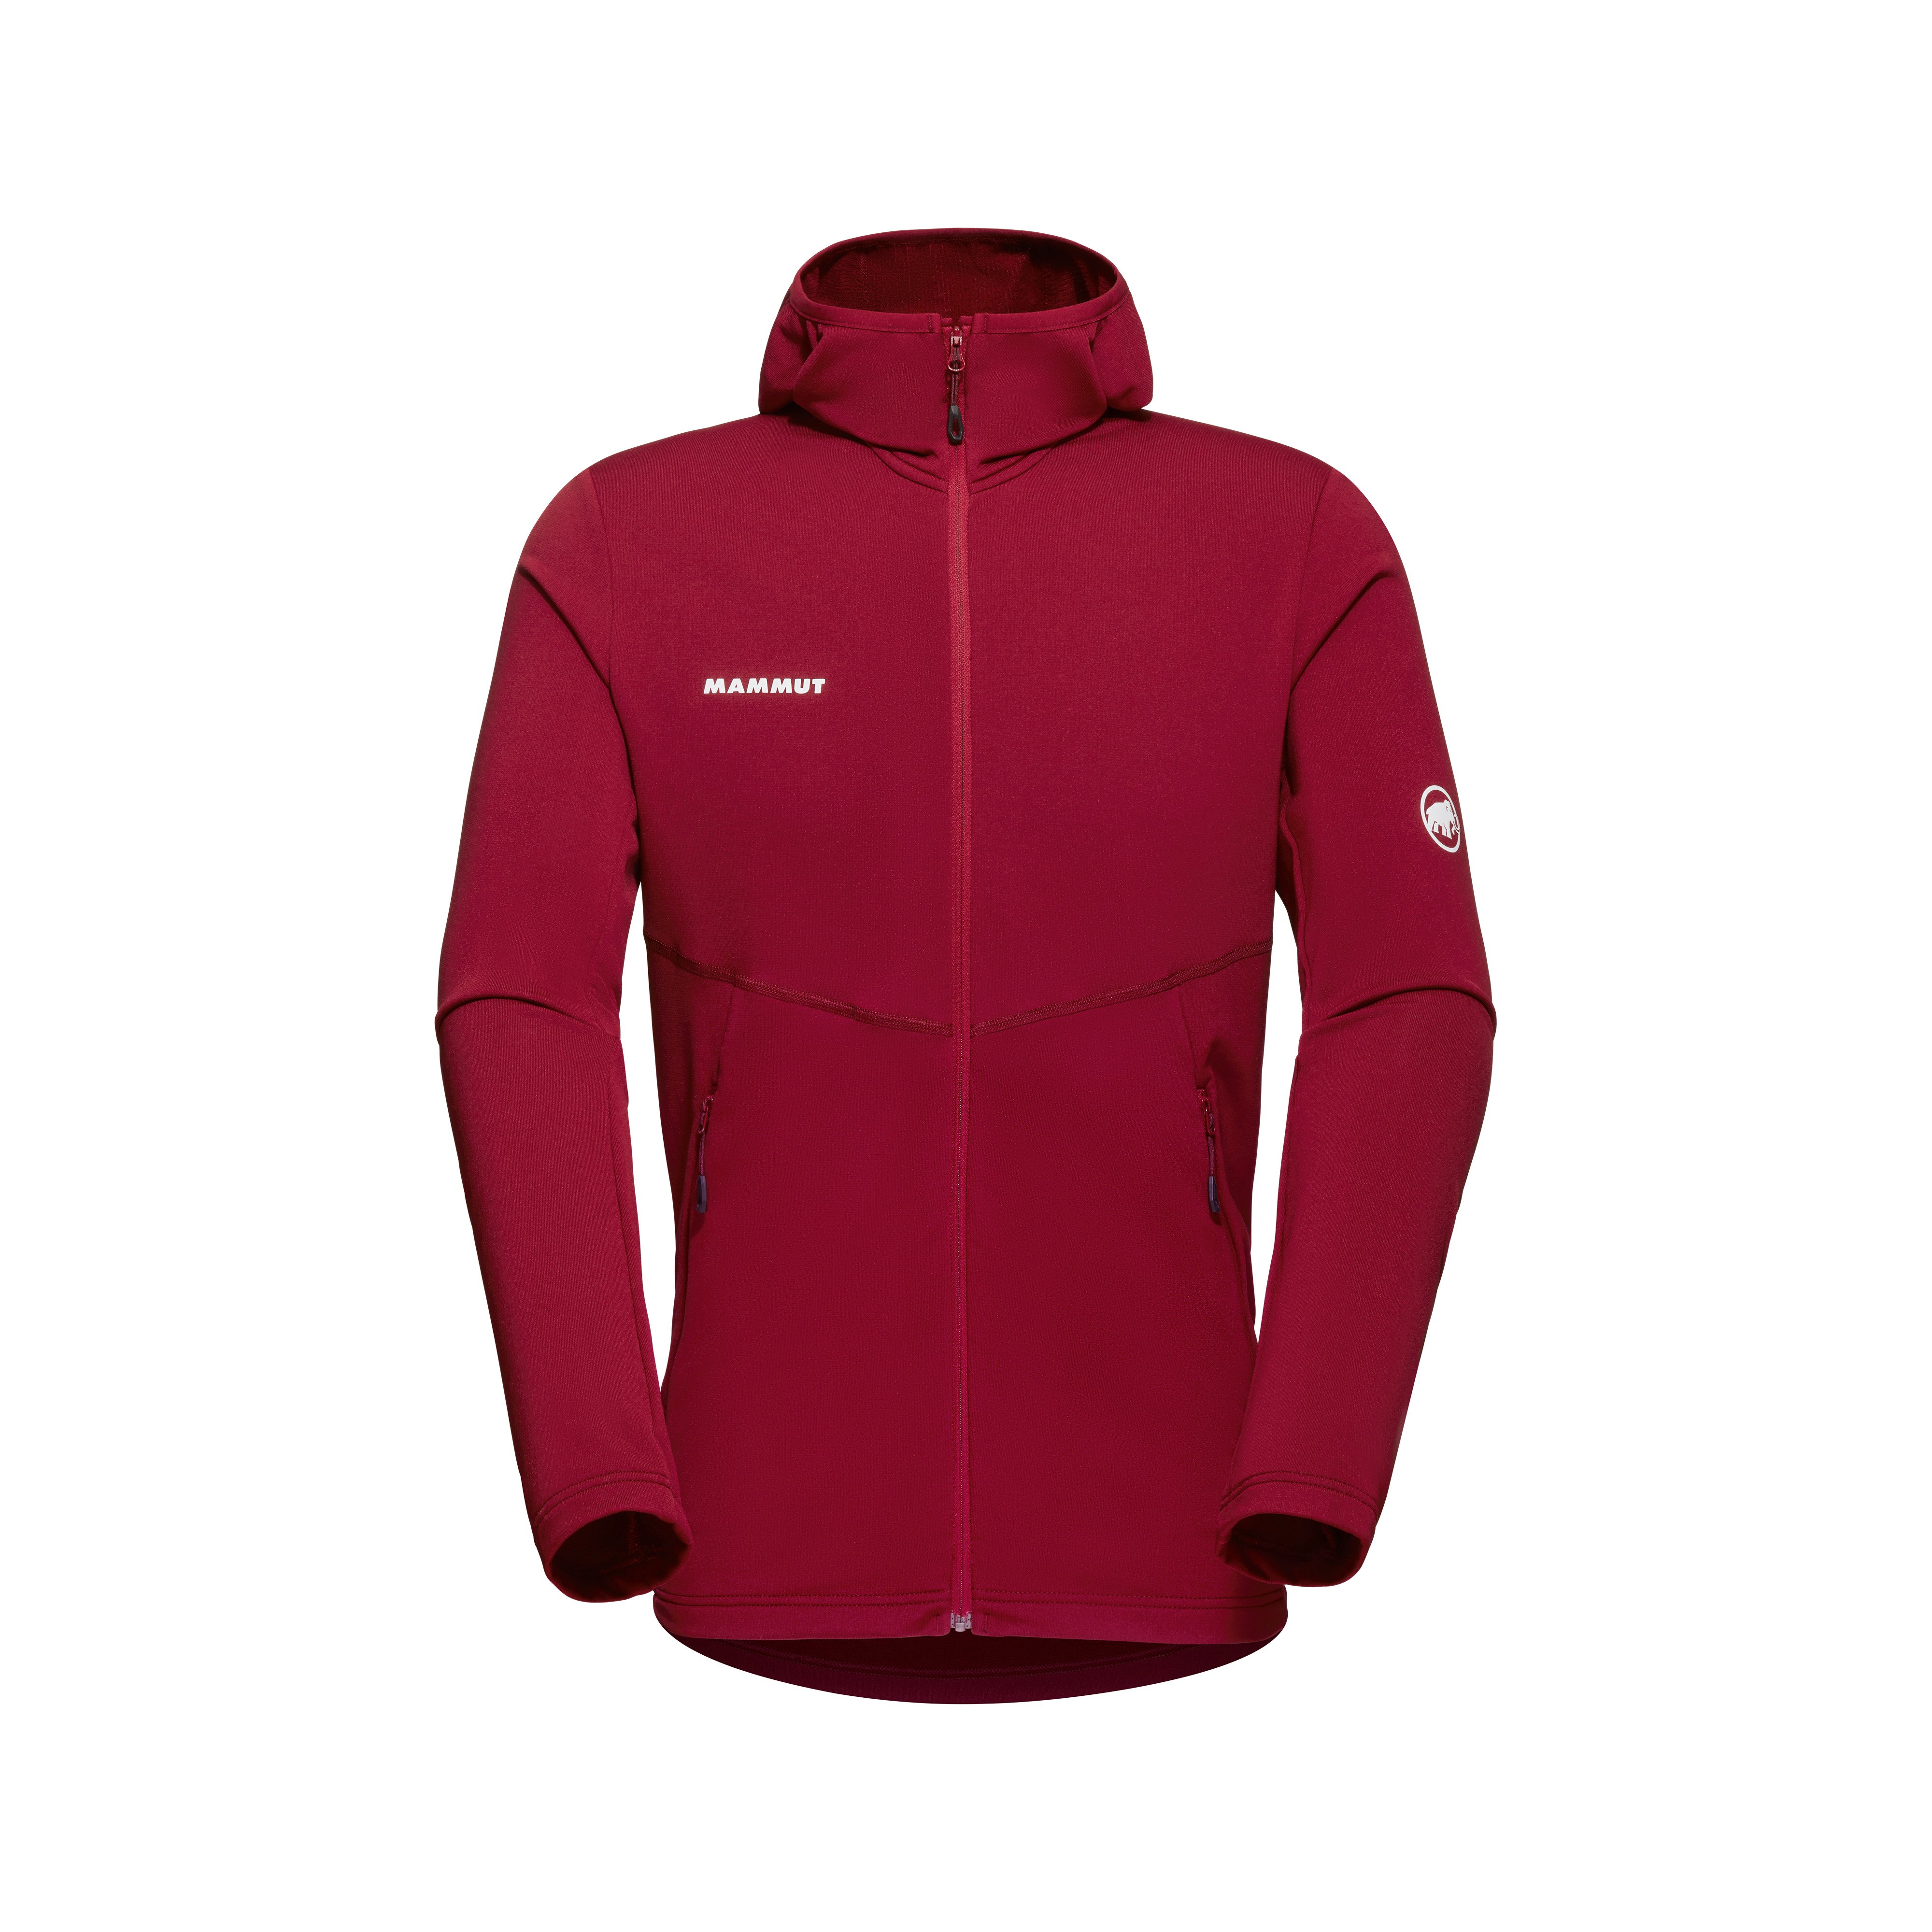 Aconcagua Light ML Hooded Jacket Men - blood red, XL product image